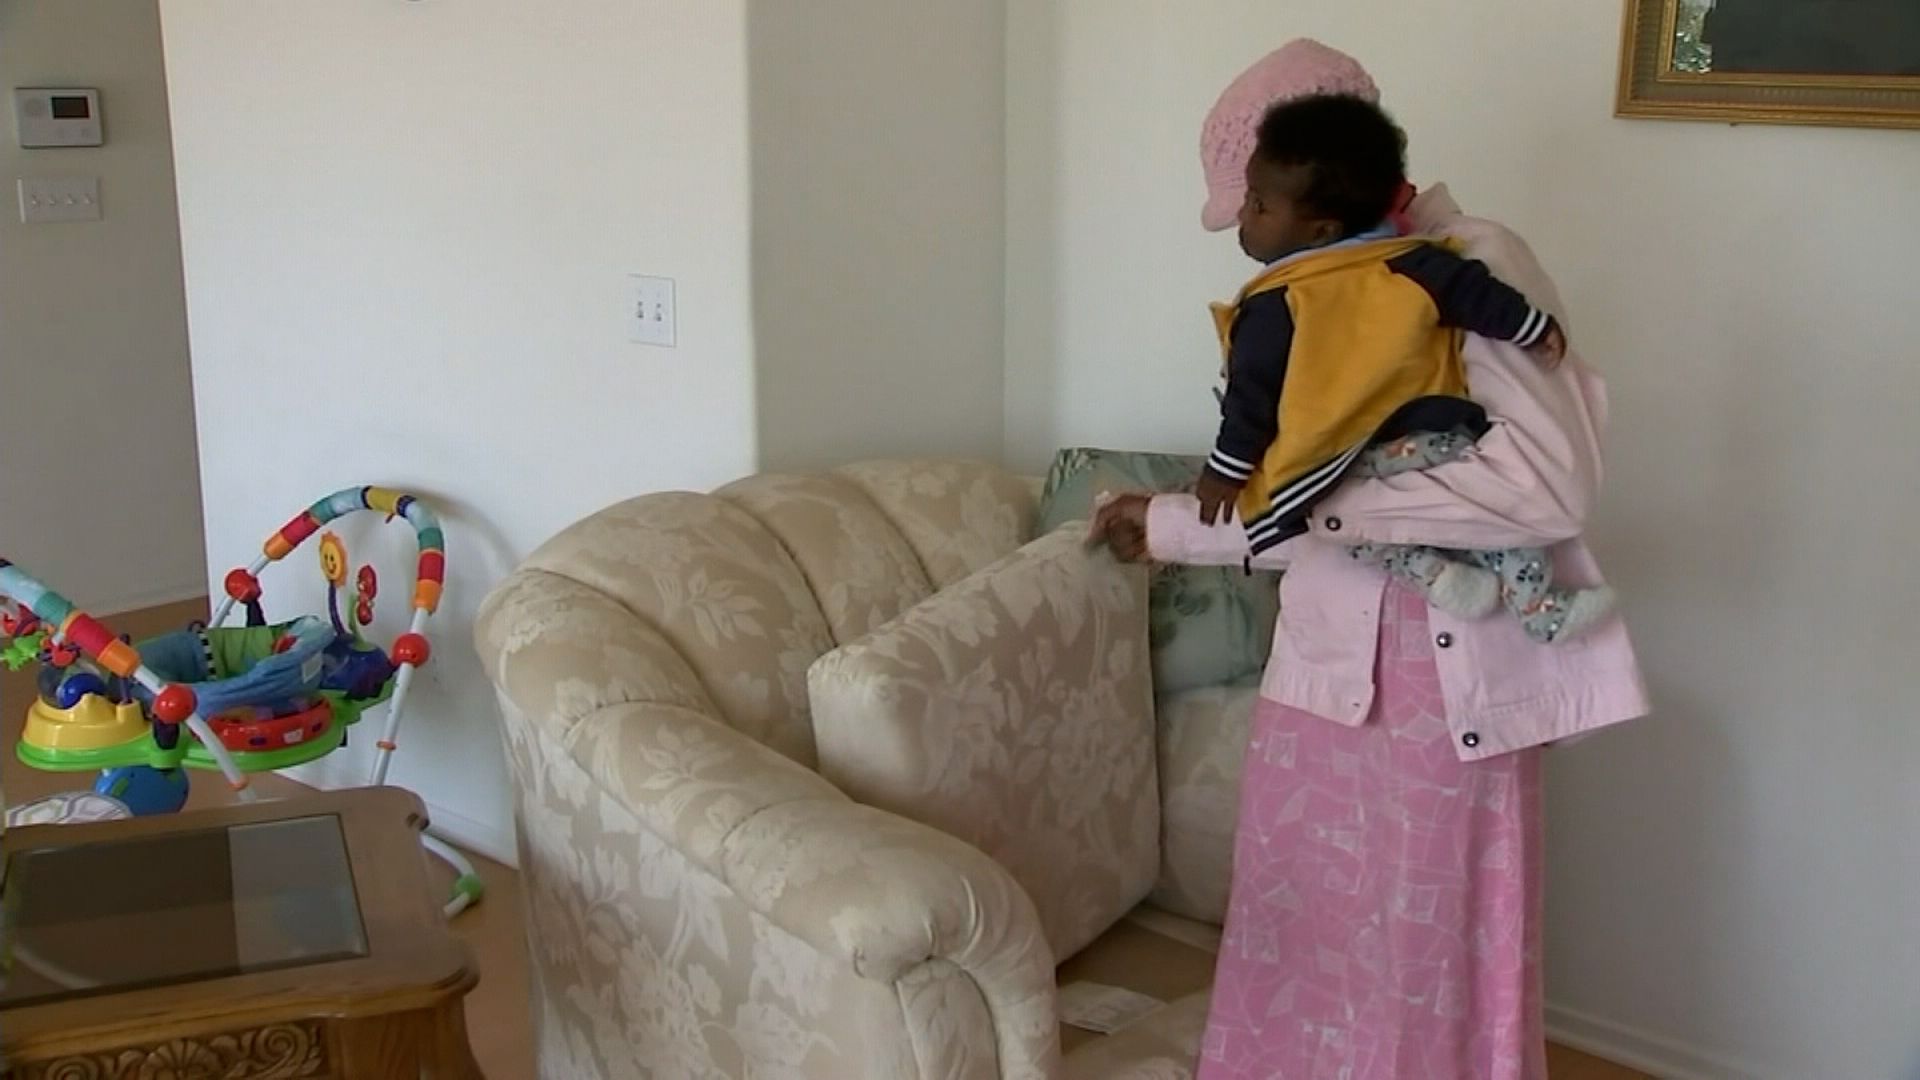 Woman Gets Free Couch From Craigslist